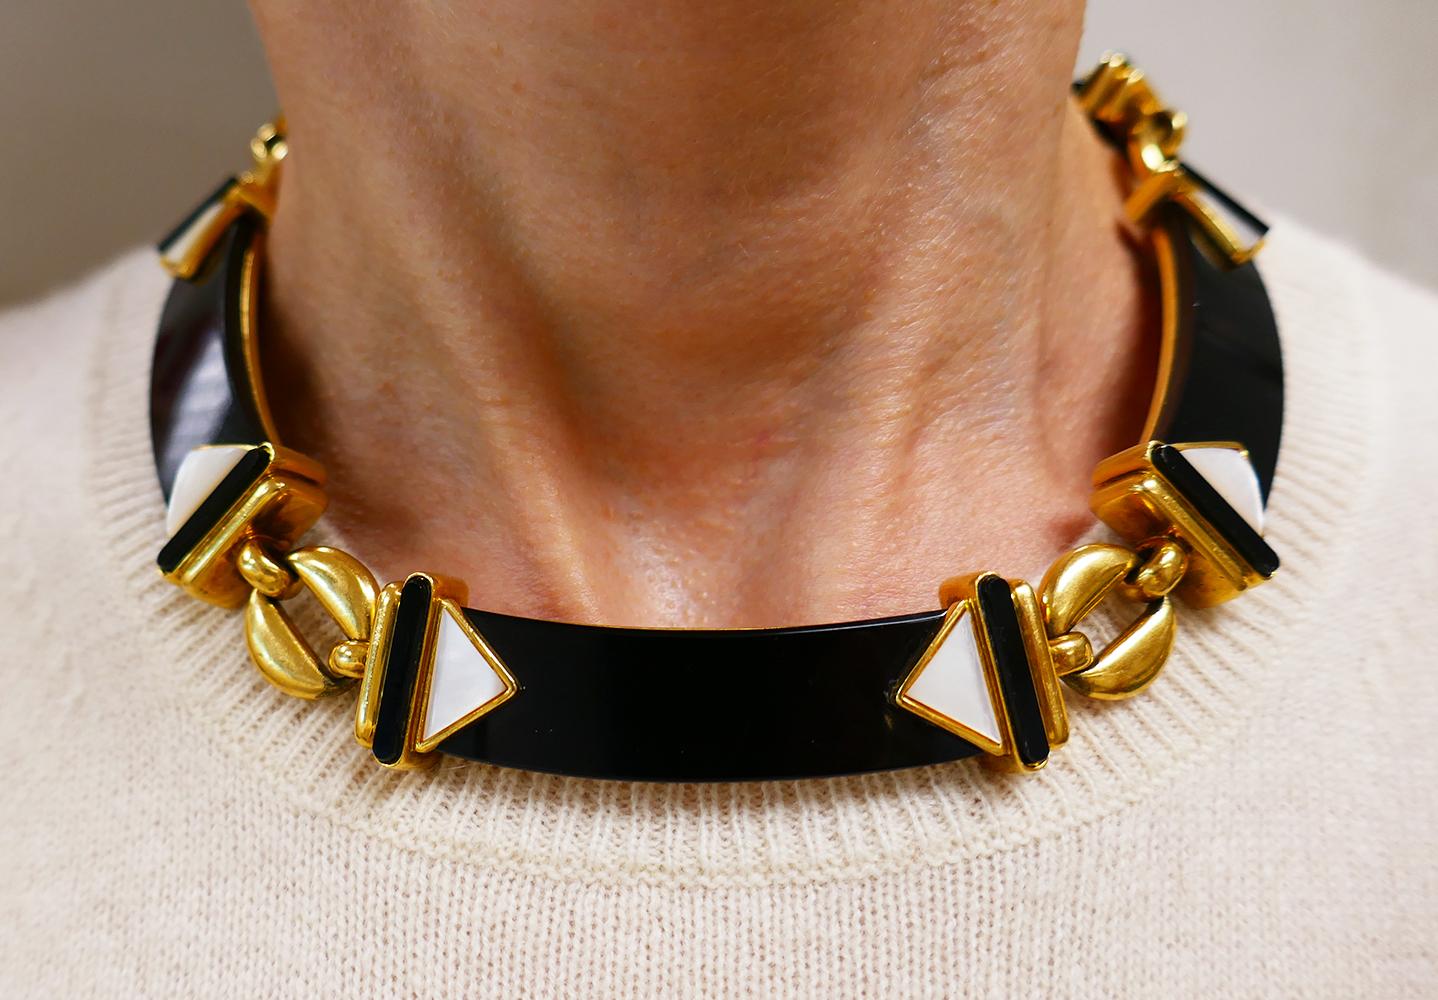 A gorgeous Cartier vintage necklace made of 18k yellow gold, black onyx, and mother-of-pearl.
The necklace design is unique and perfectly executed. It’s crafted as a flat choker comprising five rectangular black onyx plaques, slightly bent to create